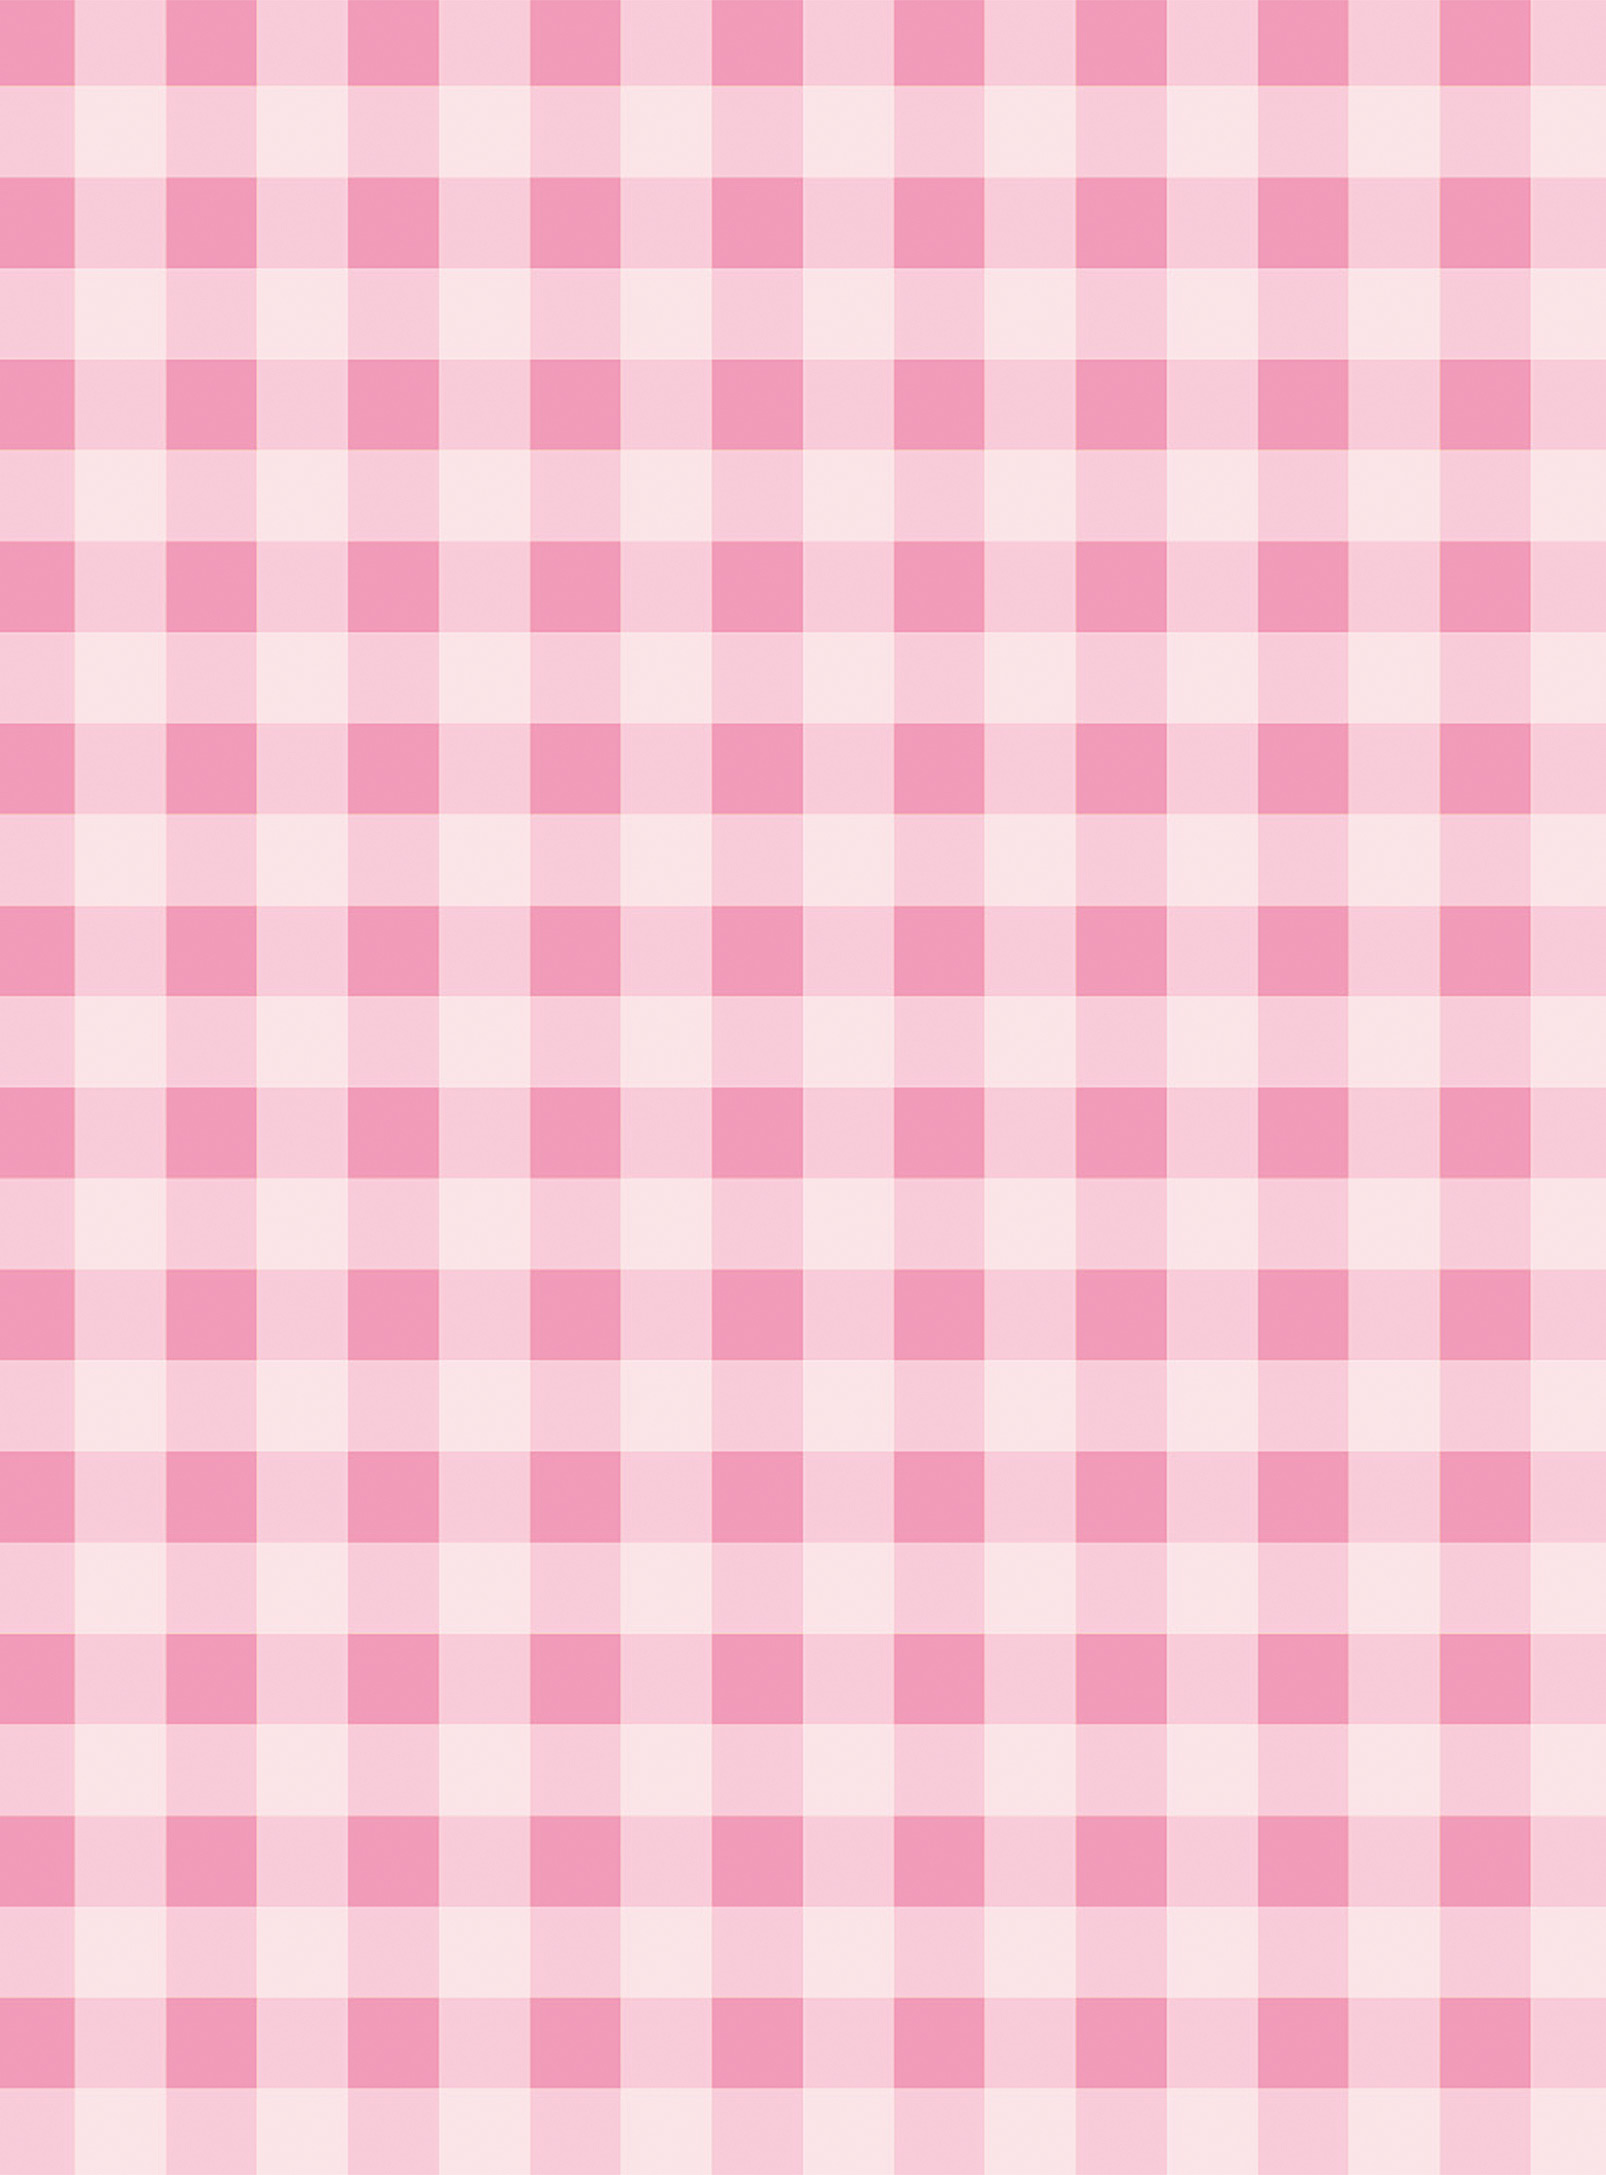 Station D Milk Shake Checkered Wallpaper Strip See Available Sizes In Pink